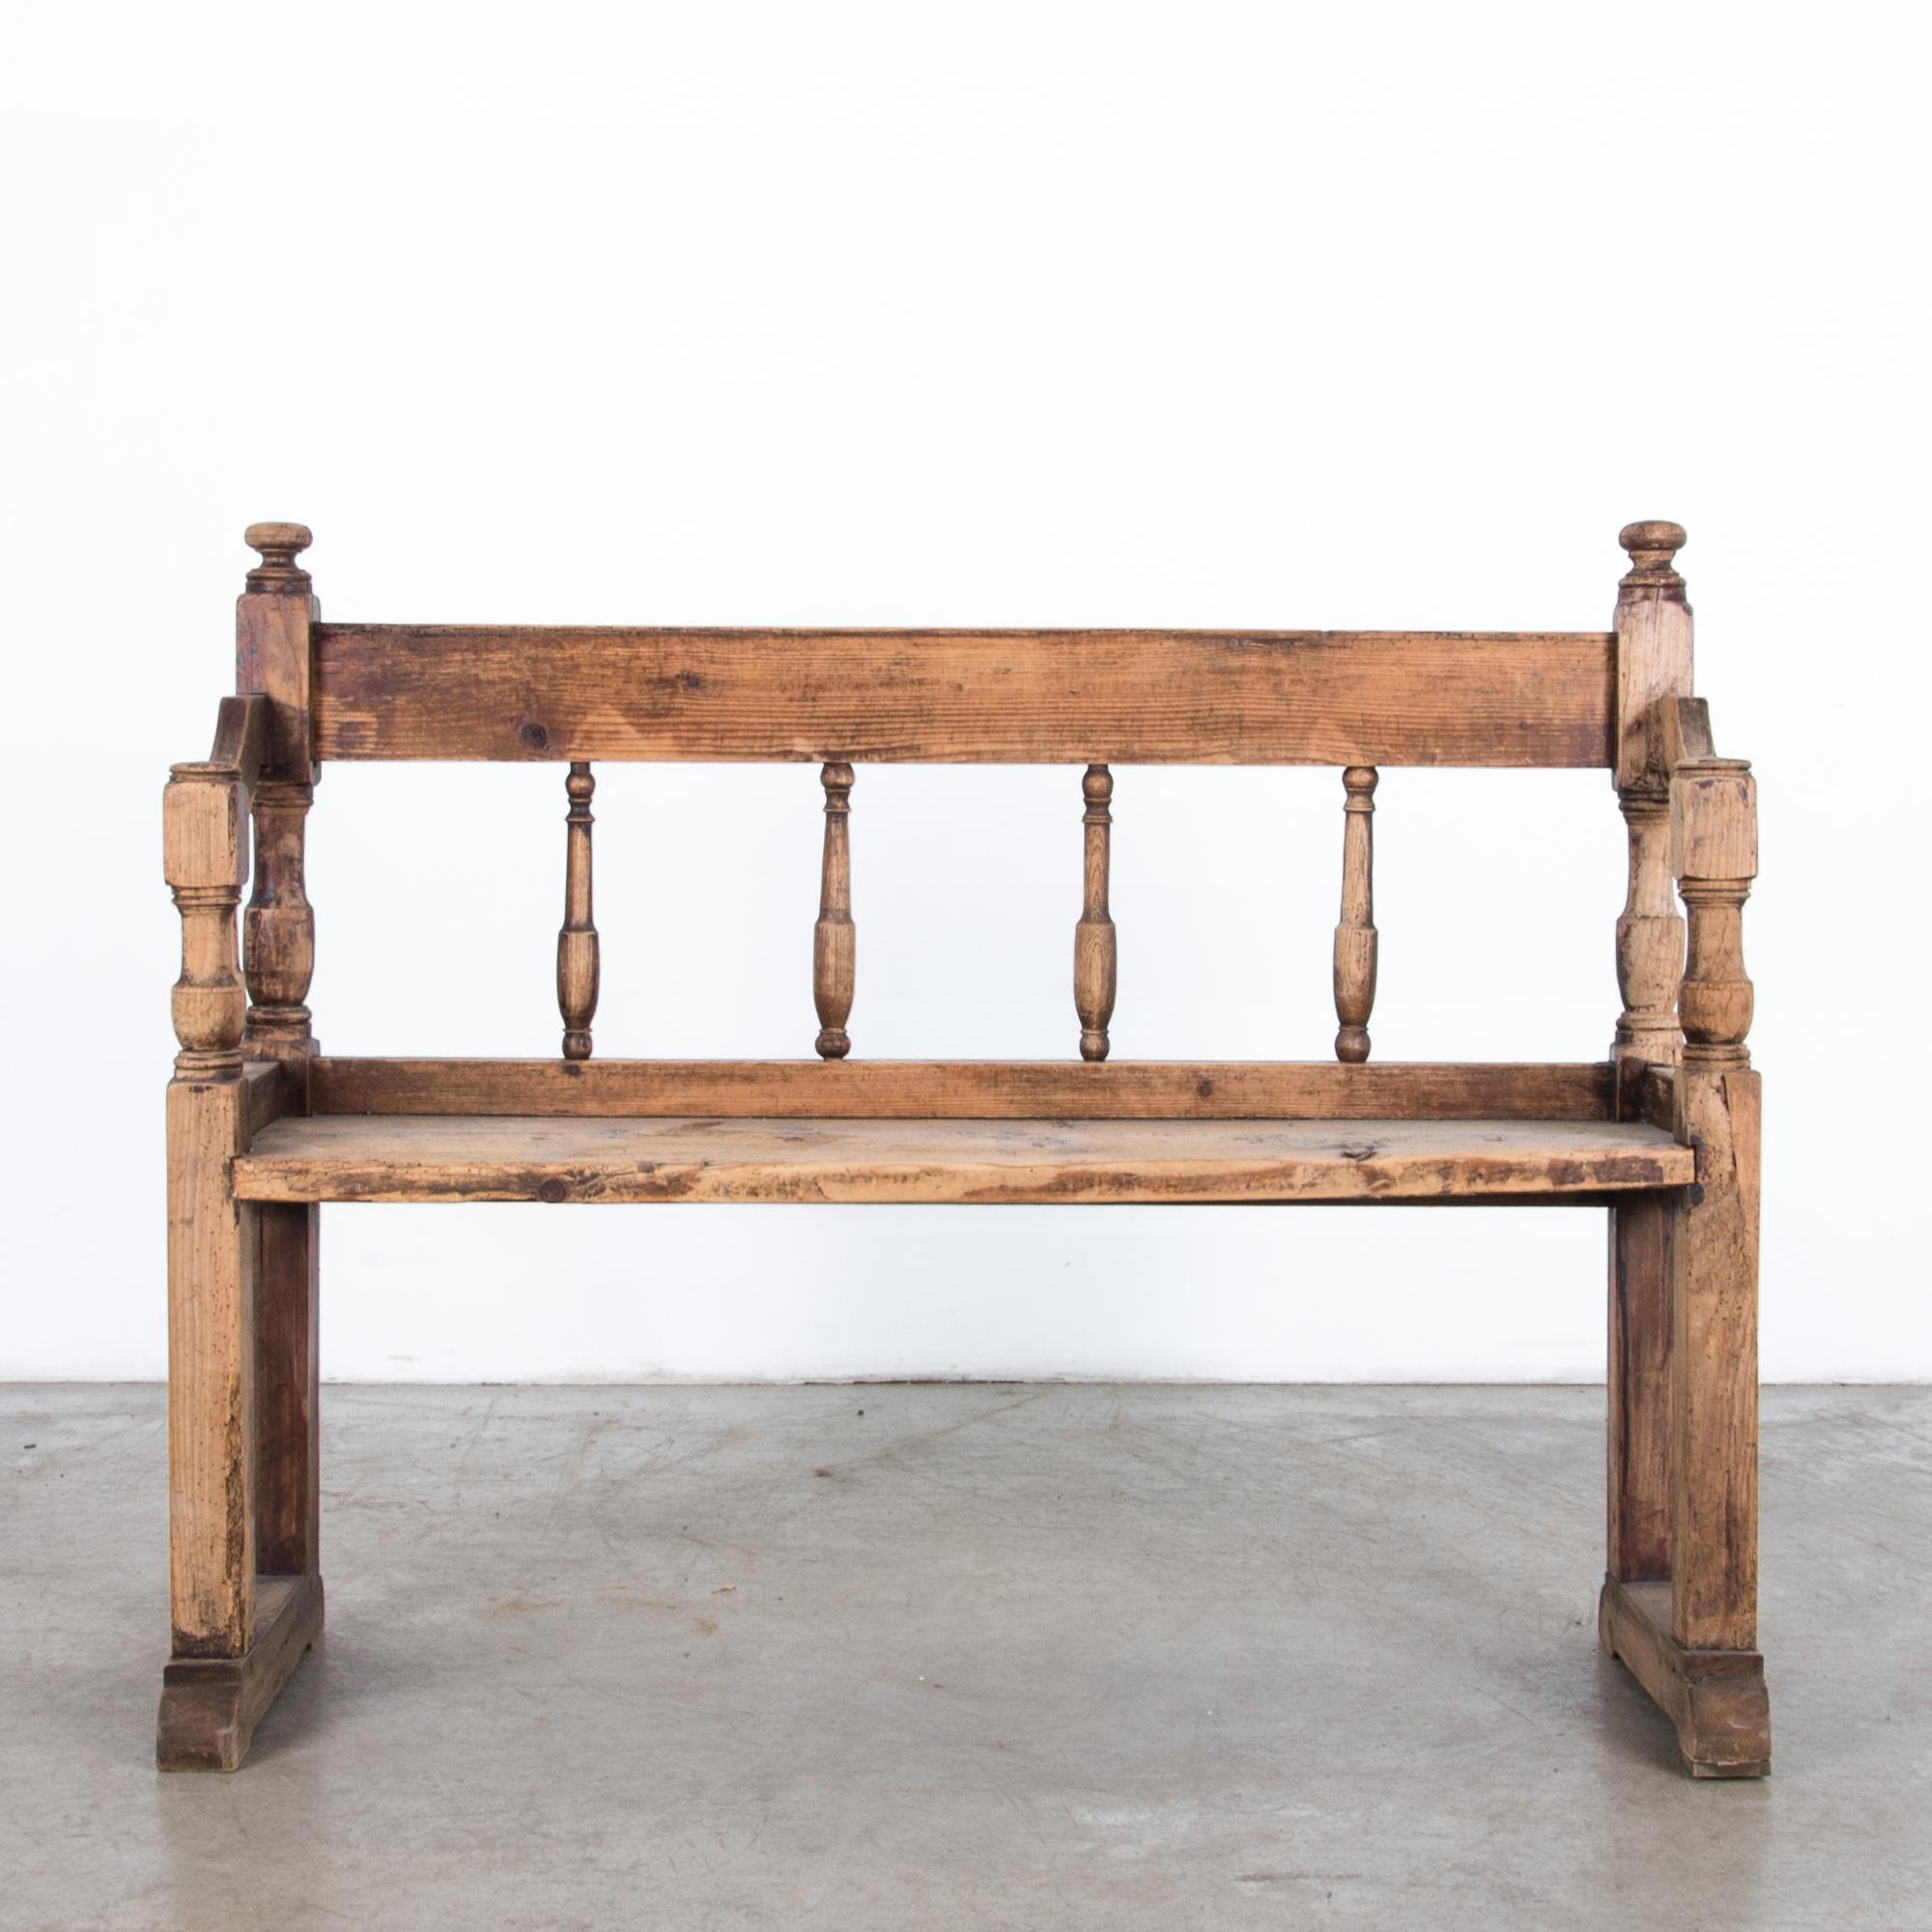 A wooden bench from France, circa 1900. Worn from years of use, a textured dark finish enhances the knotted and distressed wood for a charming high contrast patina. The traditional shape features turned wooden spindles and subtle carved details. A